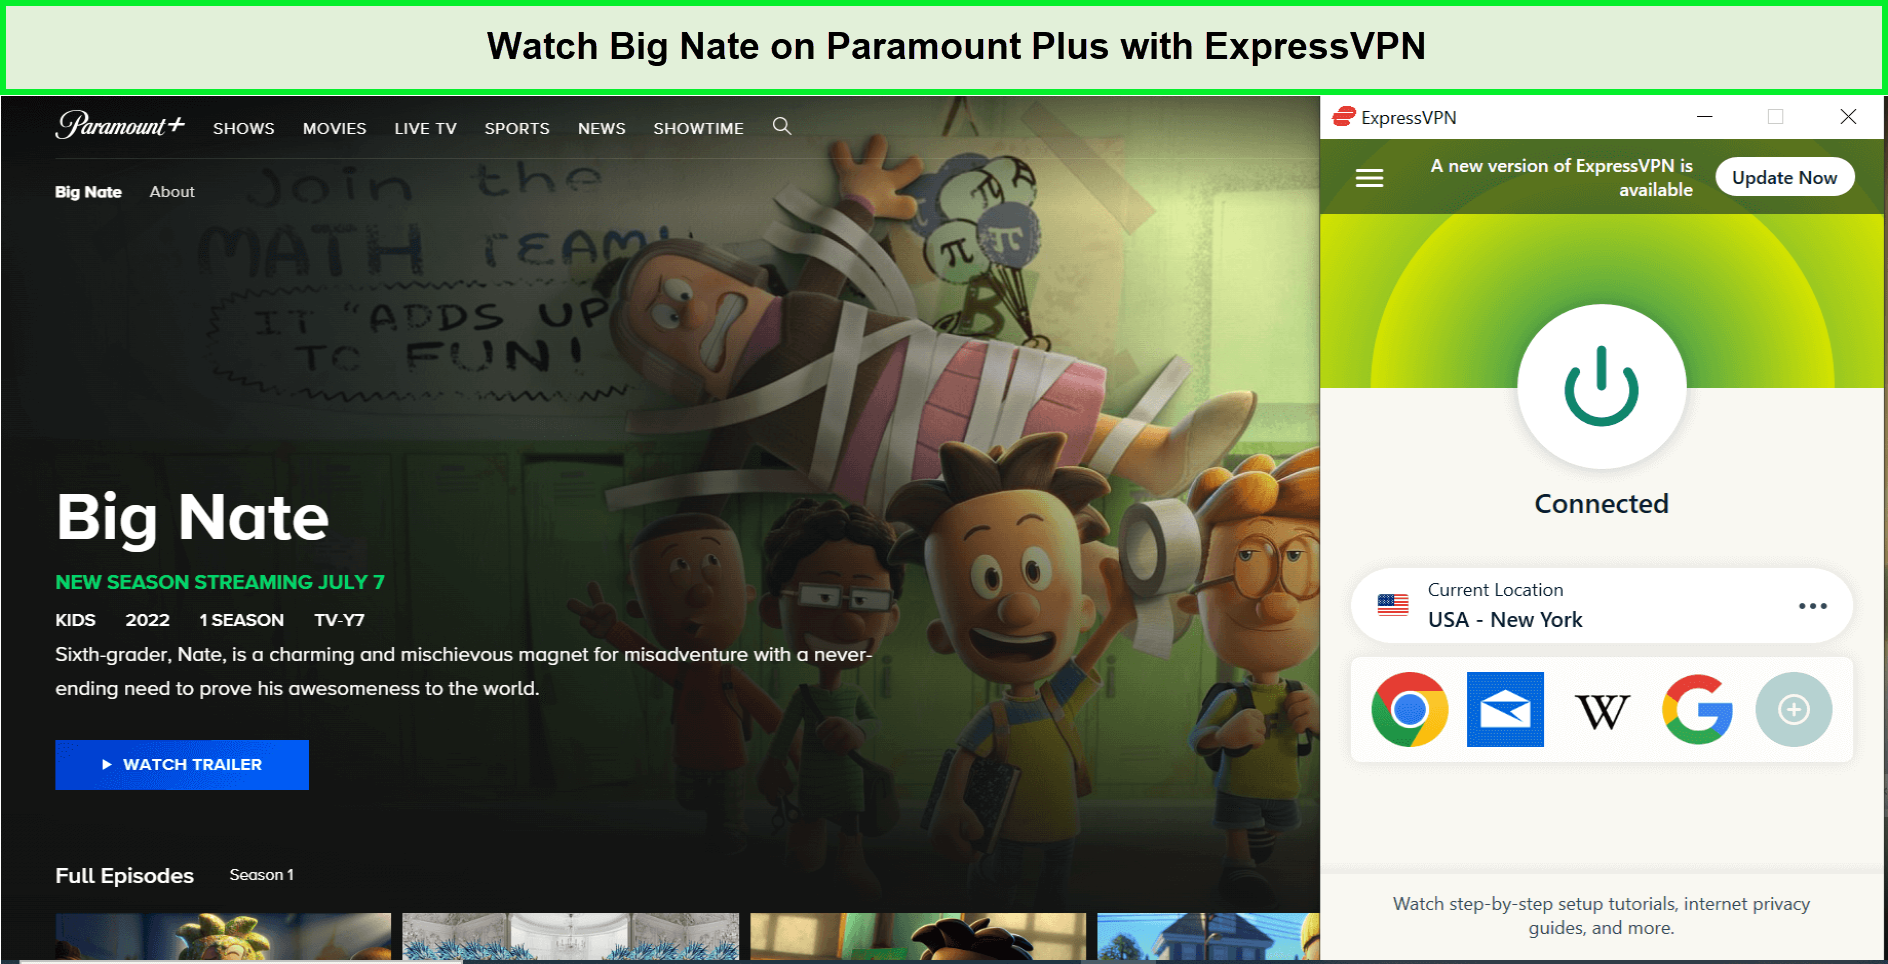 Watch-Big-Nate-Season-2-in-Spain-on-Paramount-Plus-with-ExpressVPN